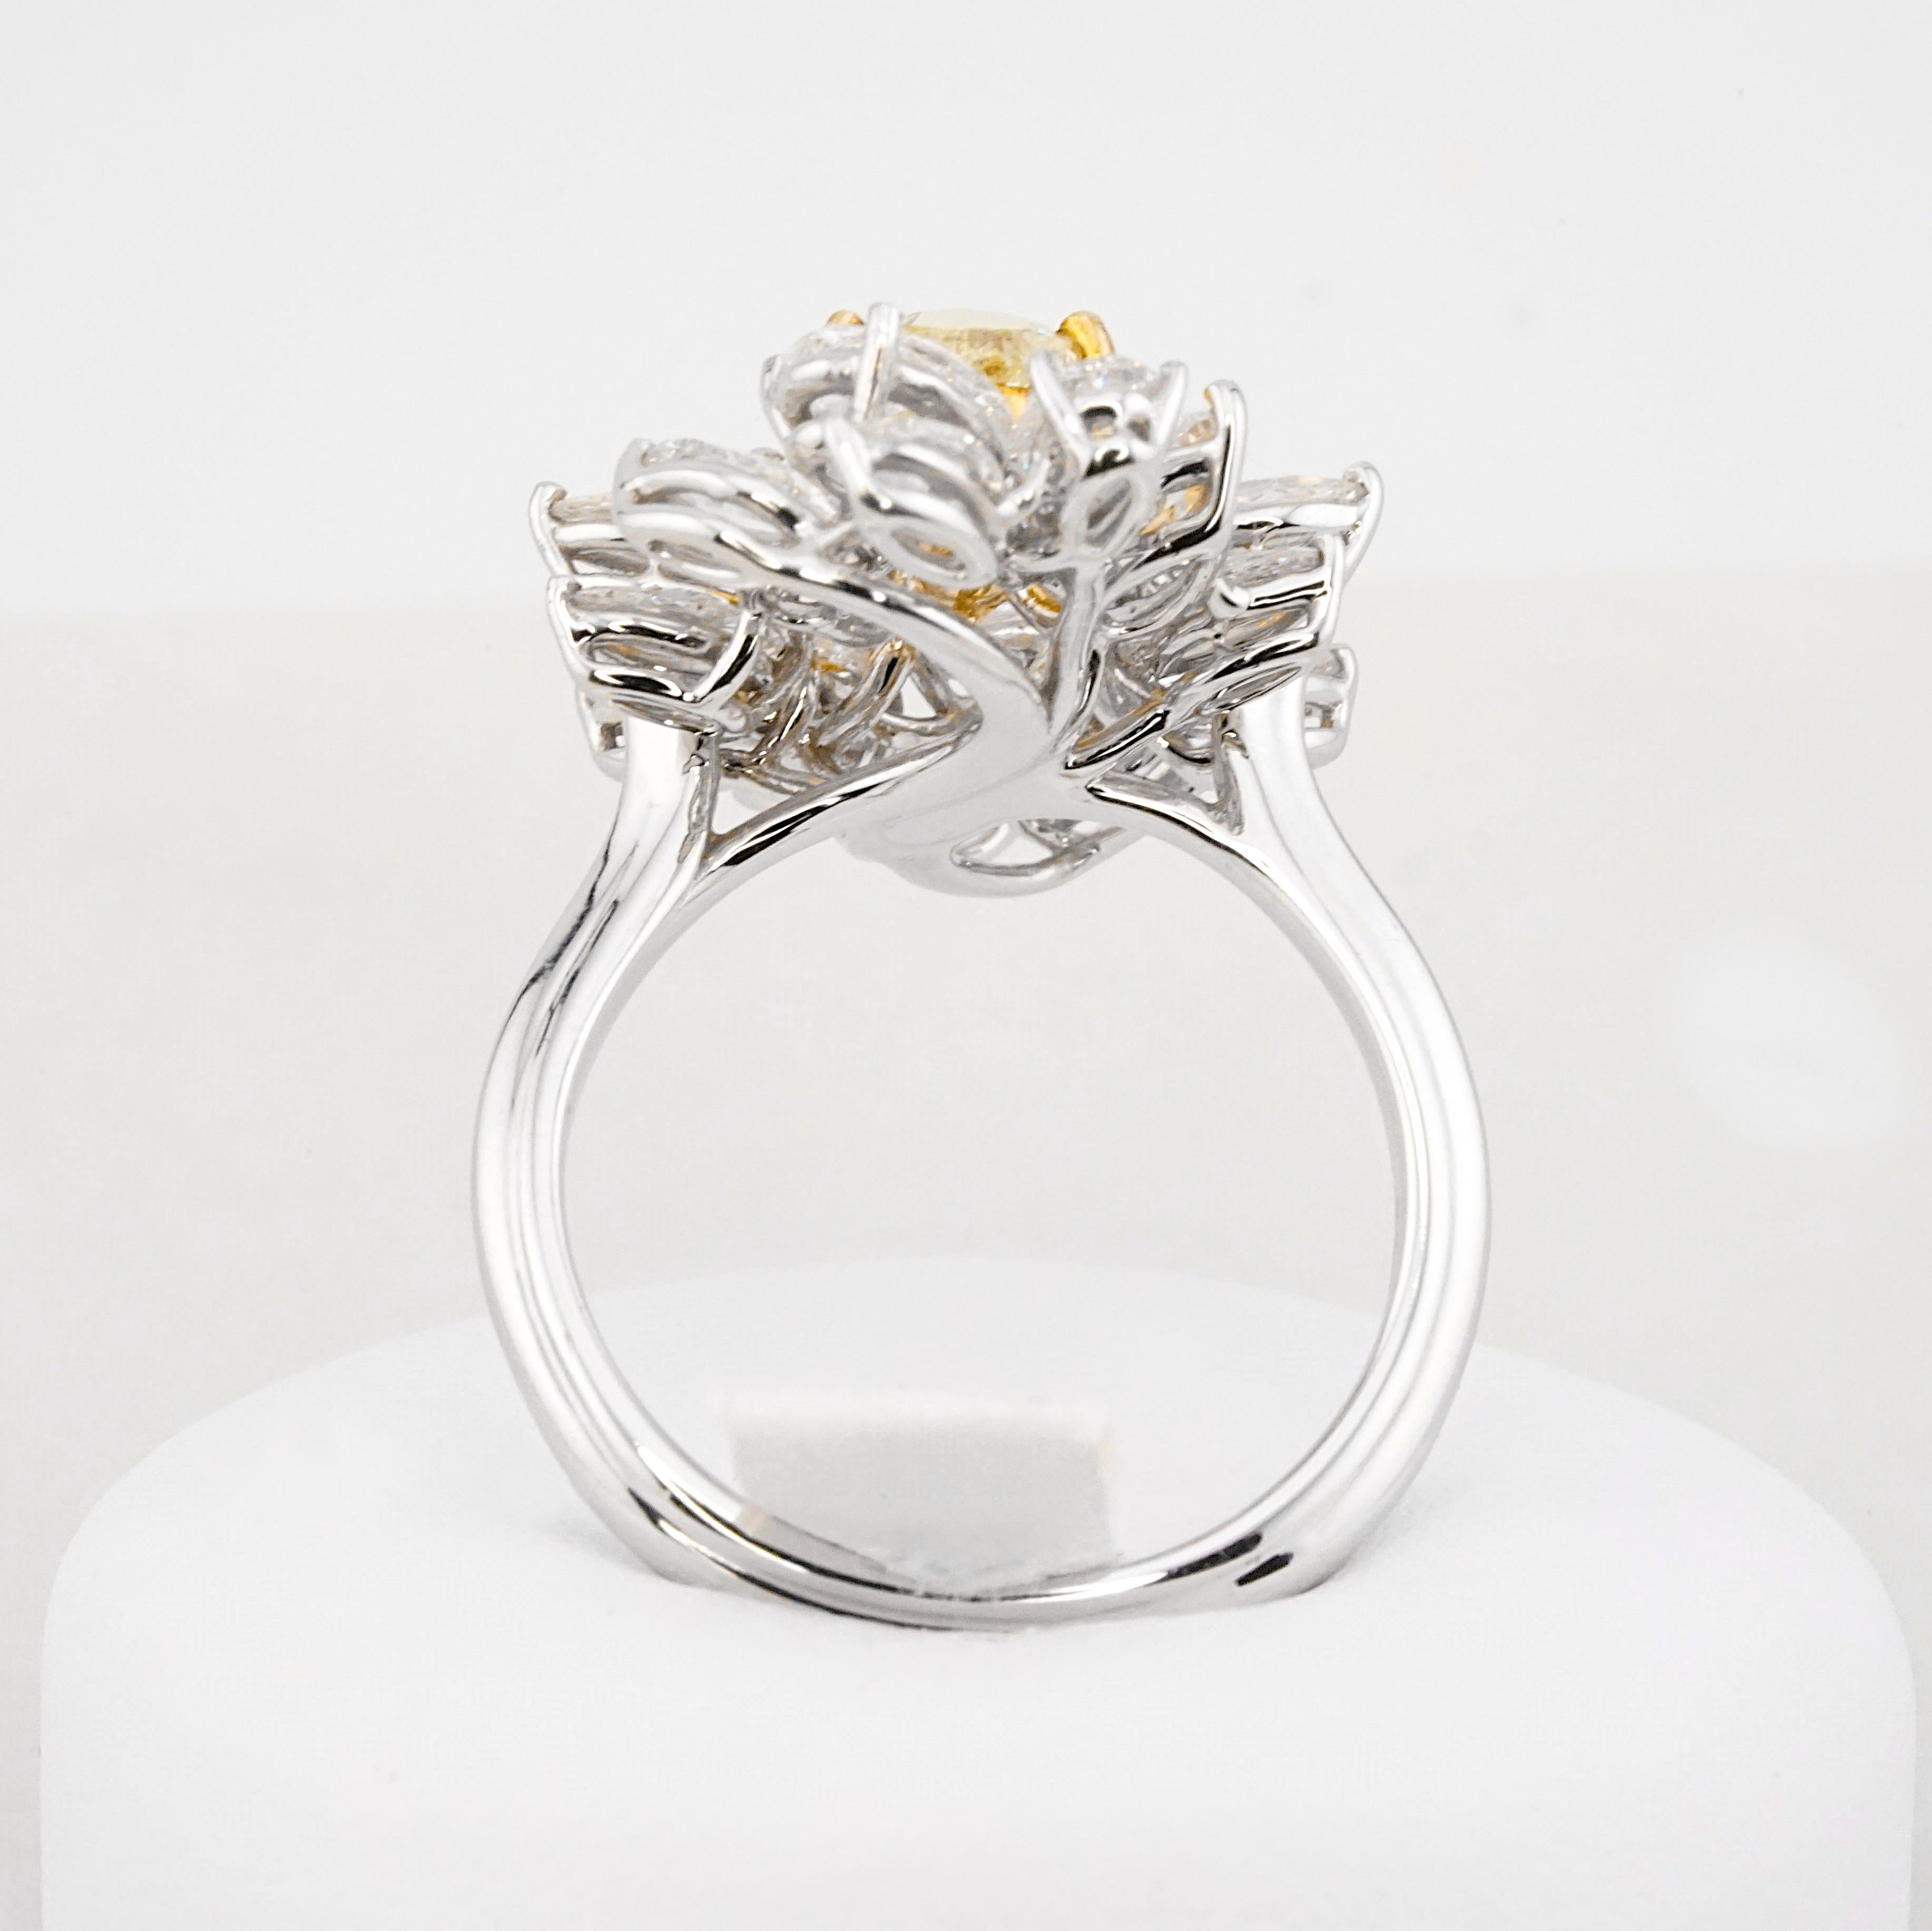 Indulge in the sheer opulence of our latest creation — an extraordinary cocktail ring that effortlessly captivates the beholder. At its heart, a GIA certified pear-cut fancy light yellow diamond, weighing a resplendent 1.35 carats, takes center